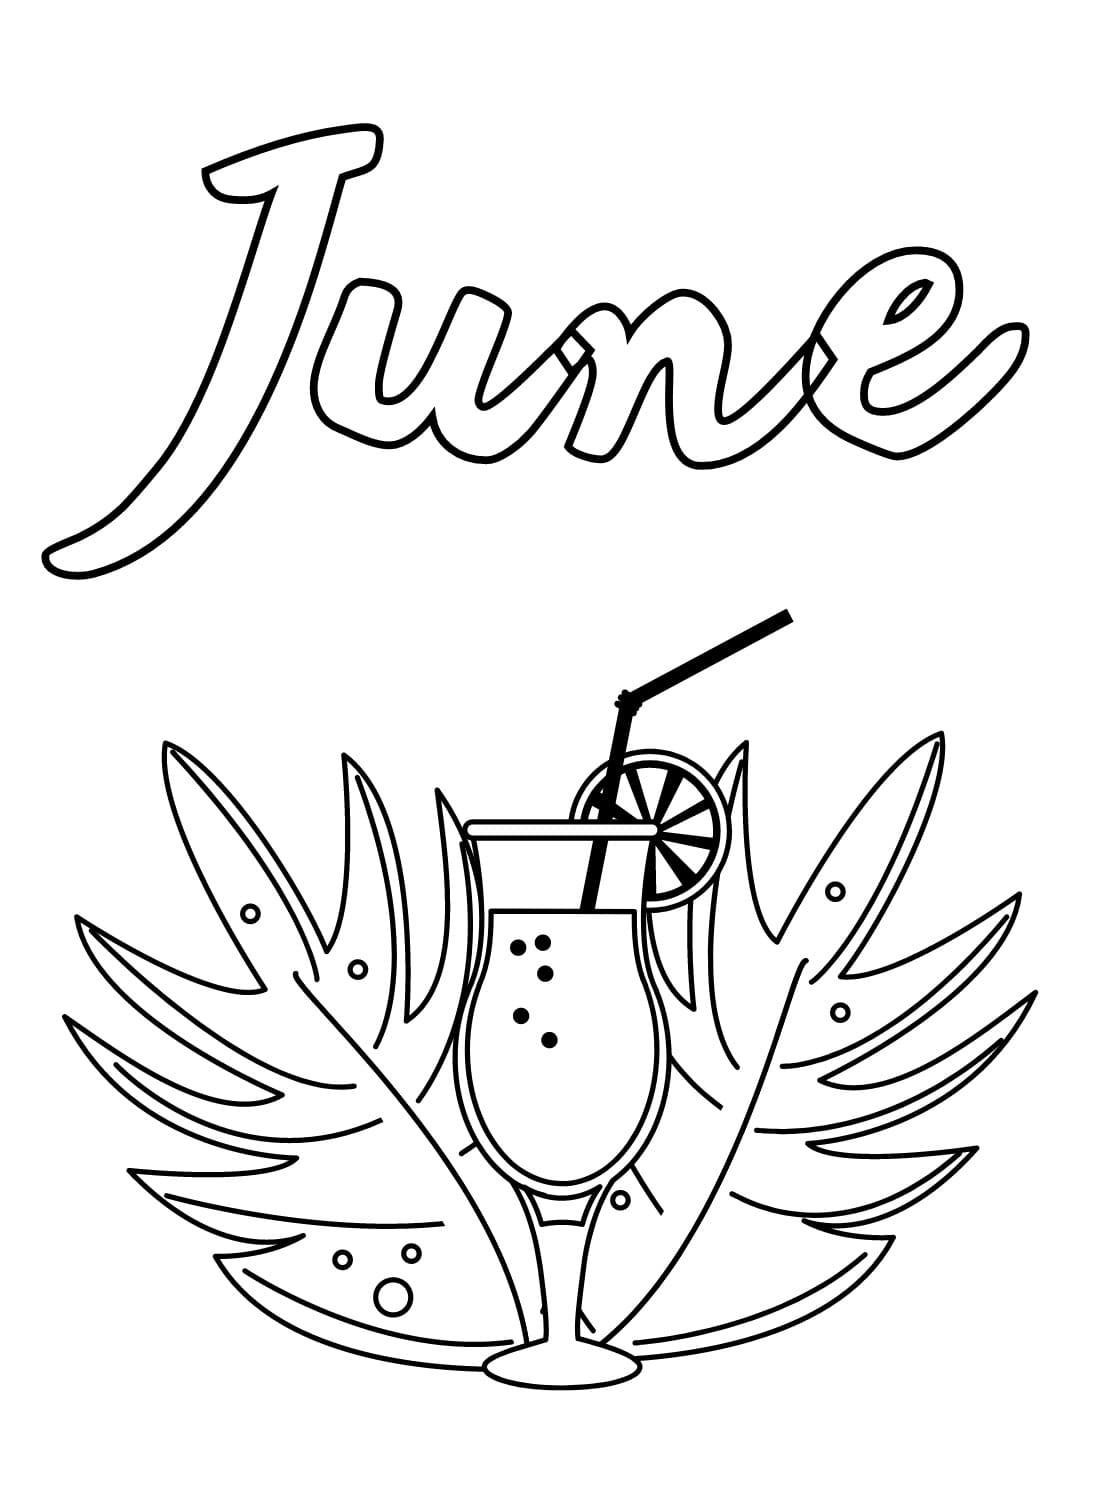 June For Kids coloring page - Download, Print or Color Online for Free